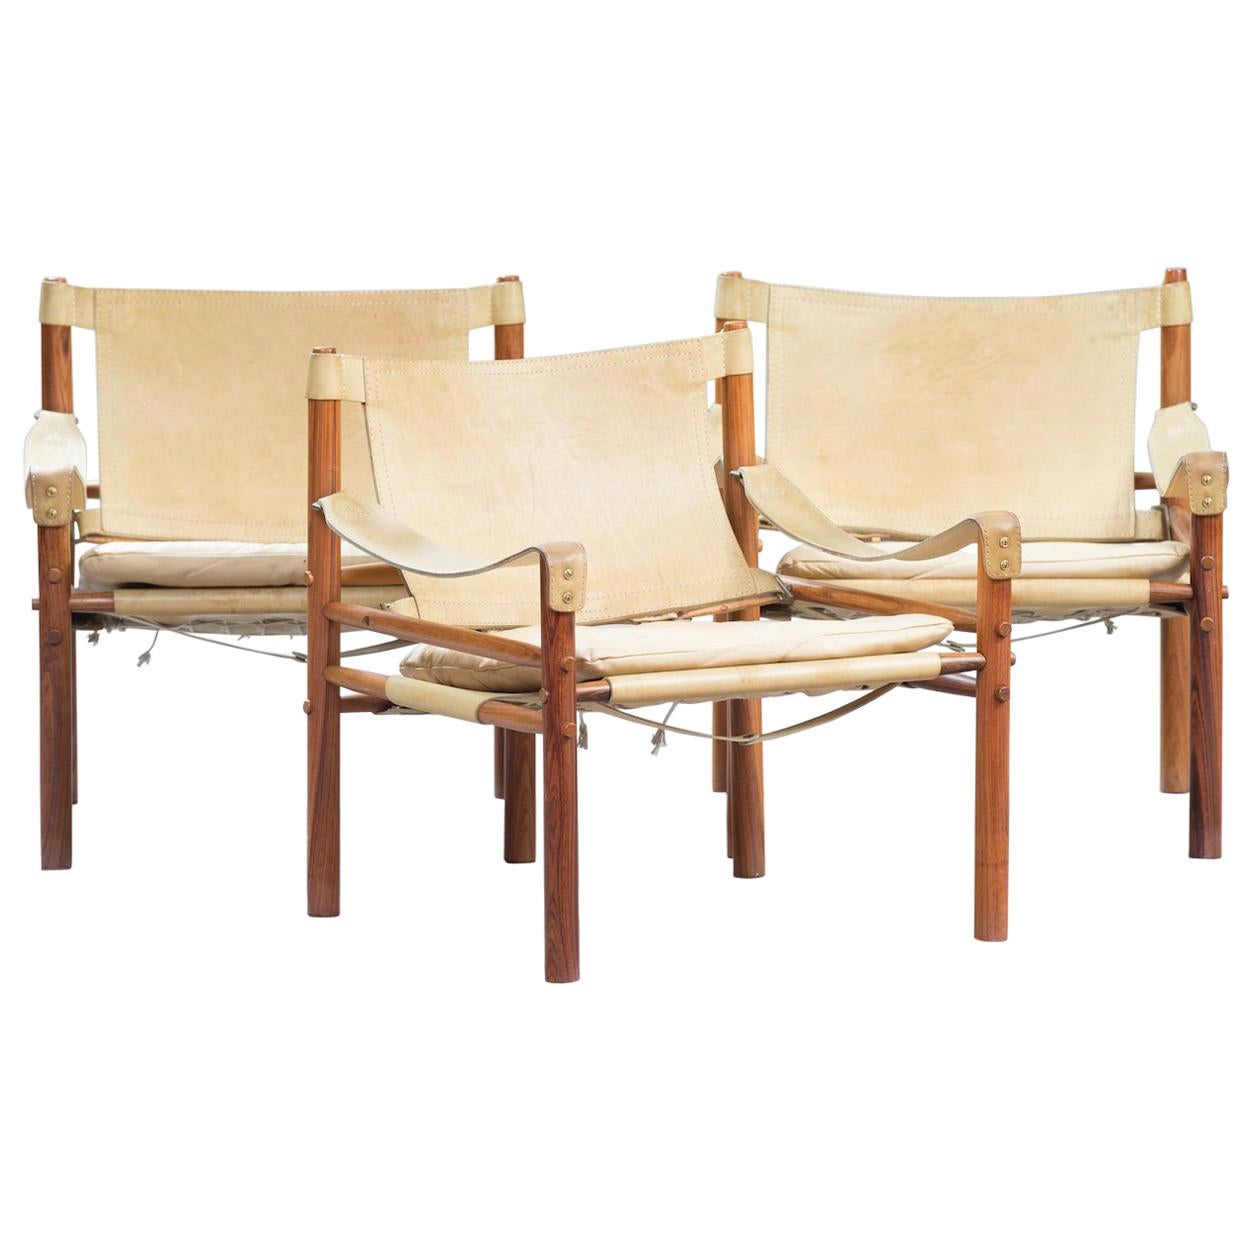 Arne Norell Sirocco Easy Chairs by Arne Norell for Aneby Mobler, One pair